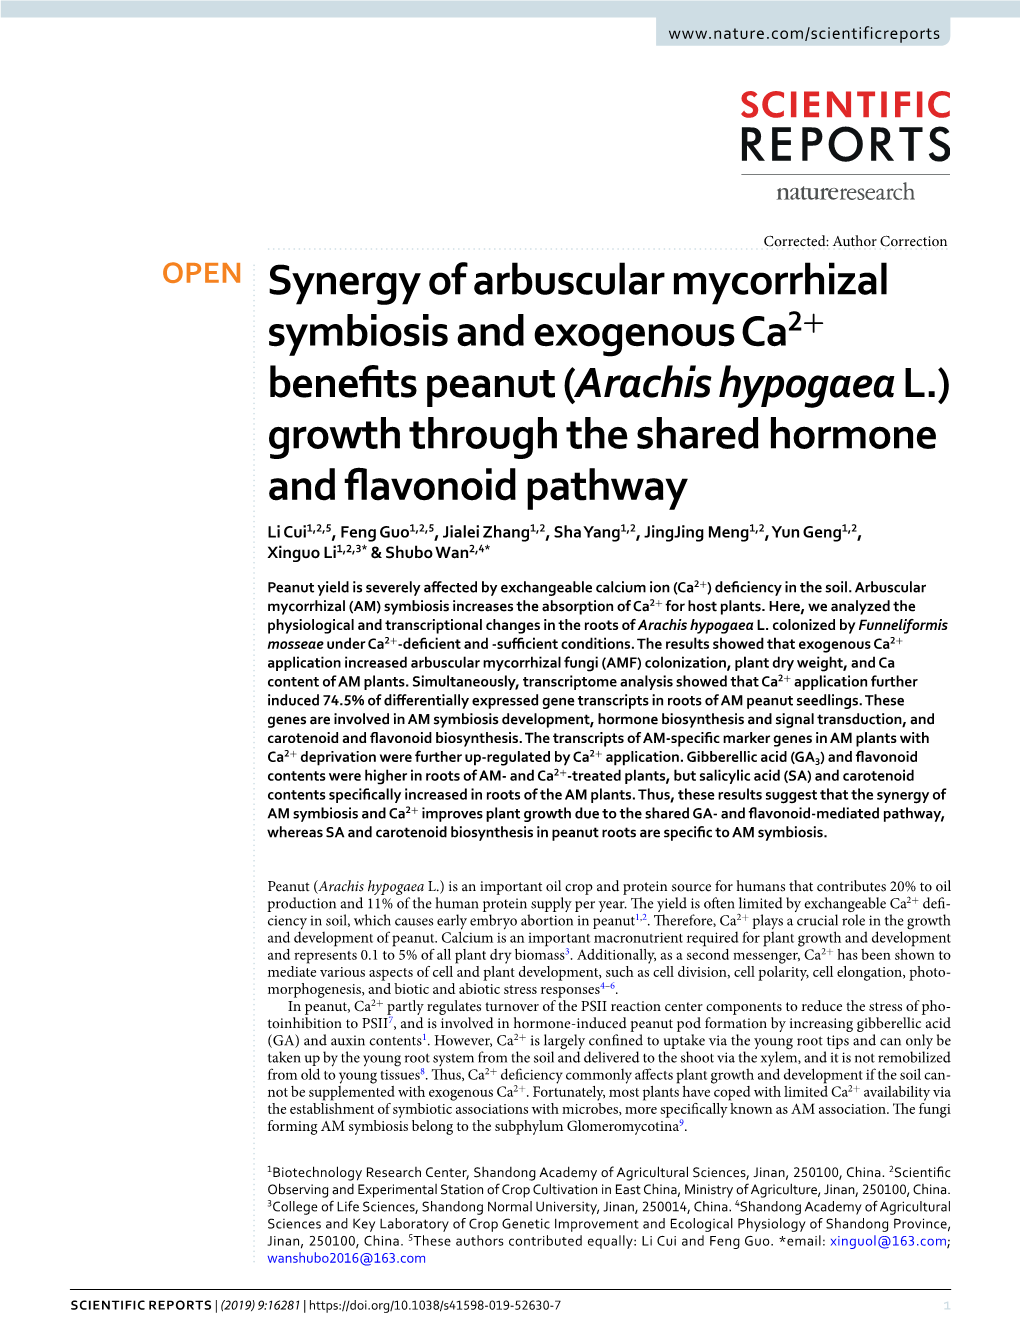 Synergy of Arbuscular Mycorrhizal Symbiosis and Exogenous